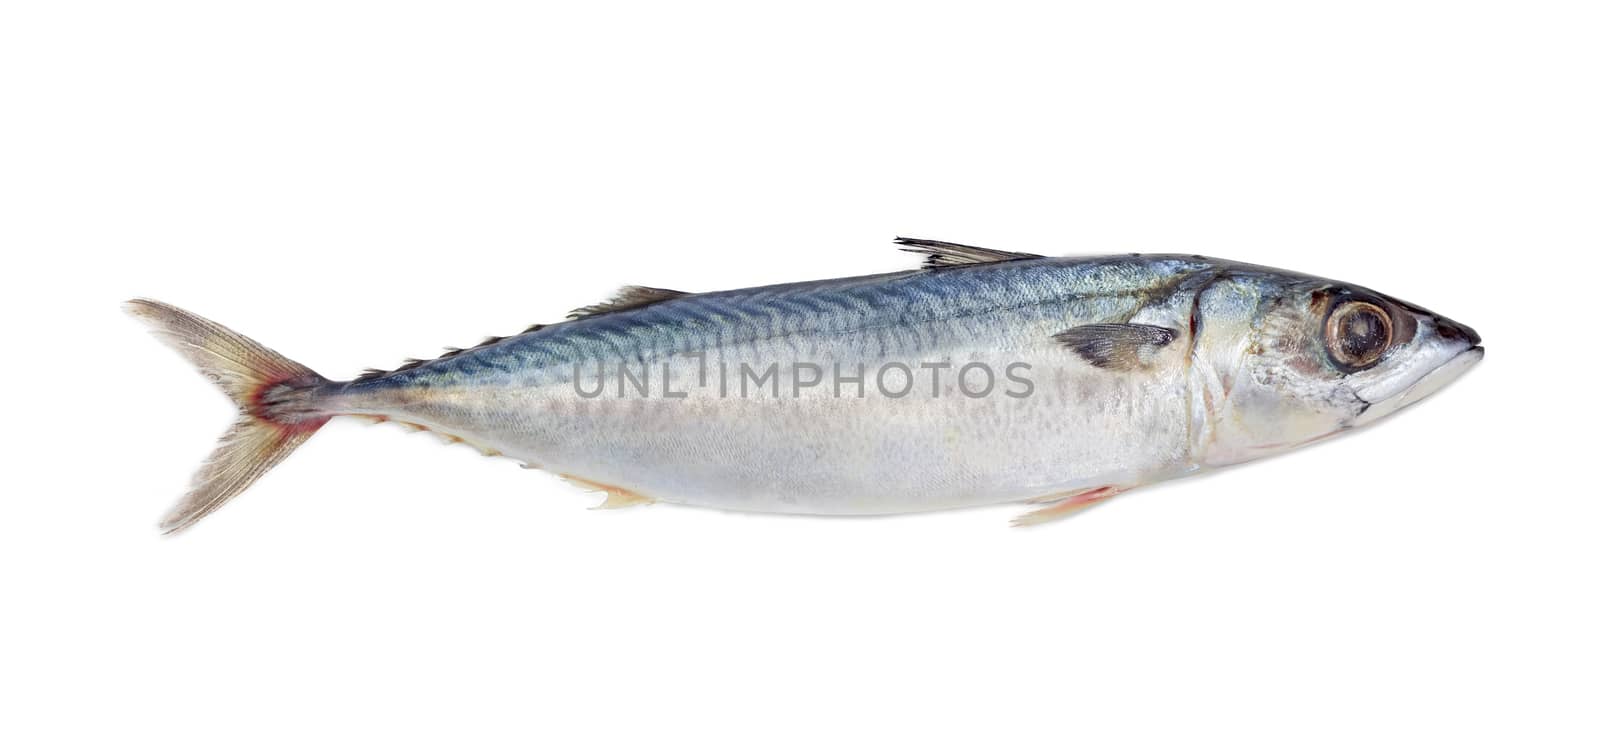 One fresh uncooked  bullet tuna on a light background
